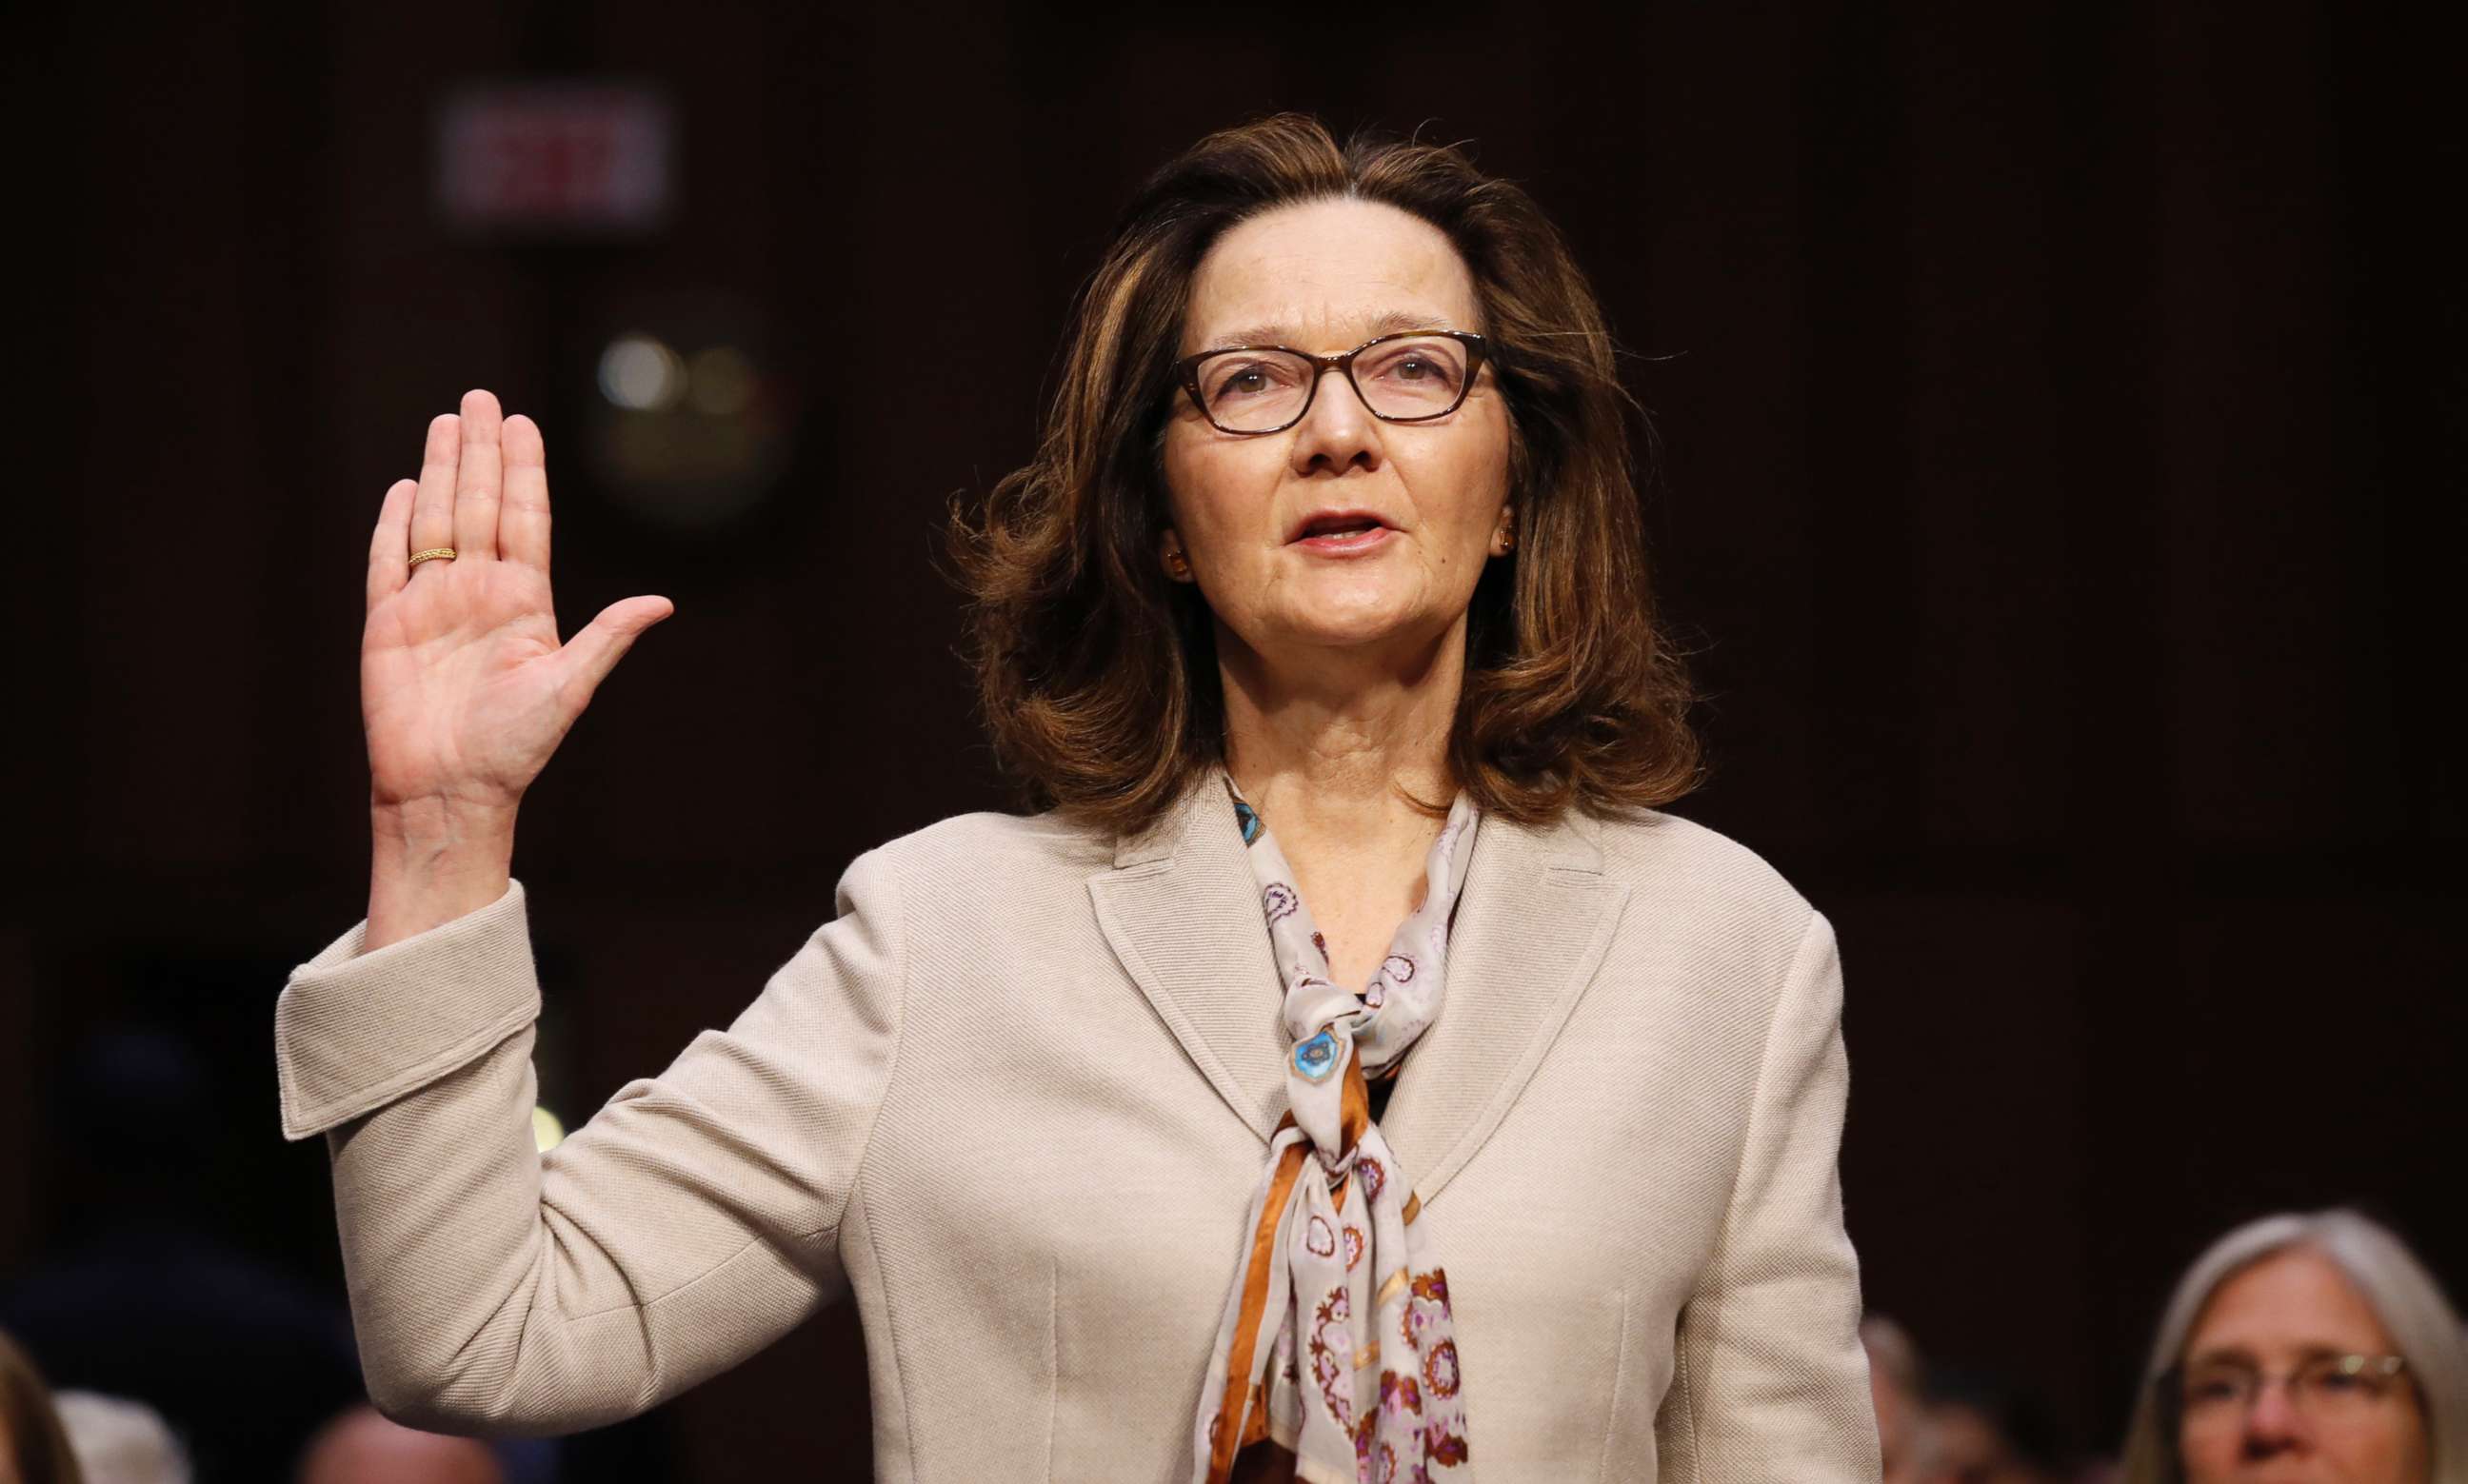 PHOTO: CIA nominee Gina Haspel is sworn in during a confirmation hearing of the Senate Intelligence Committee on Capitol Hill, May 9, 2018, in Washington.